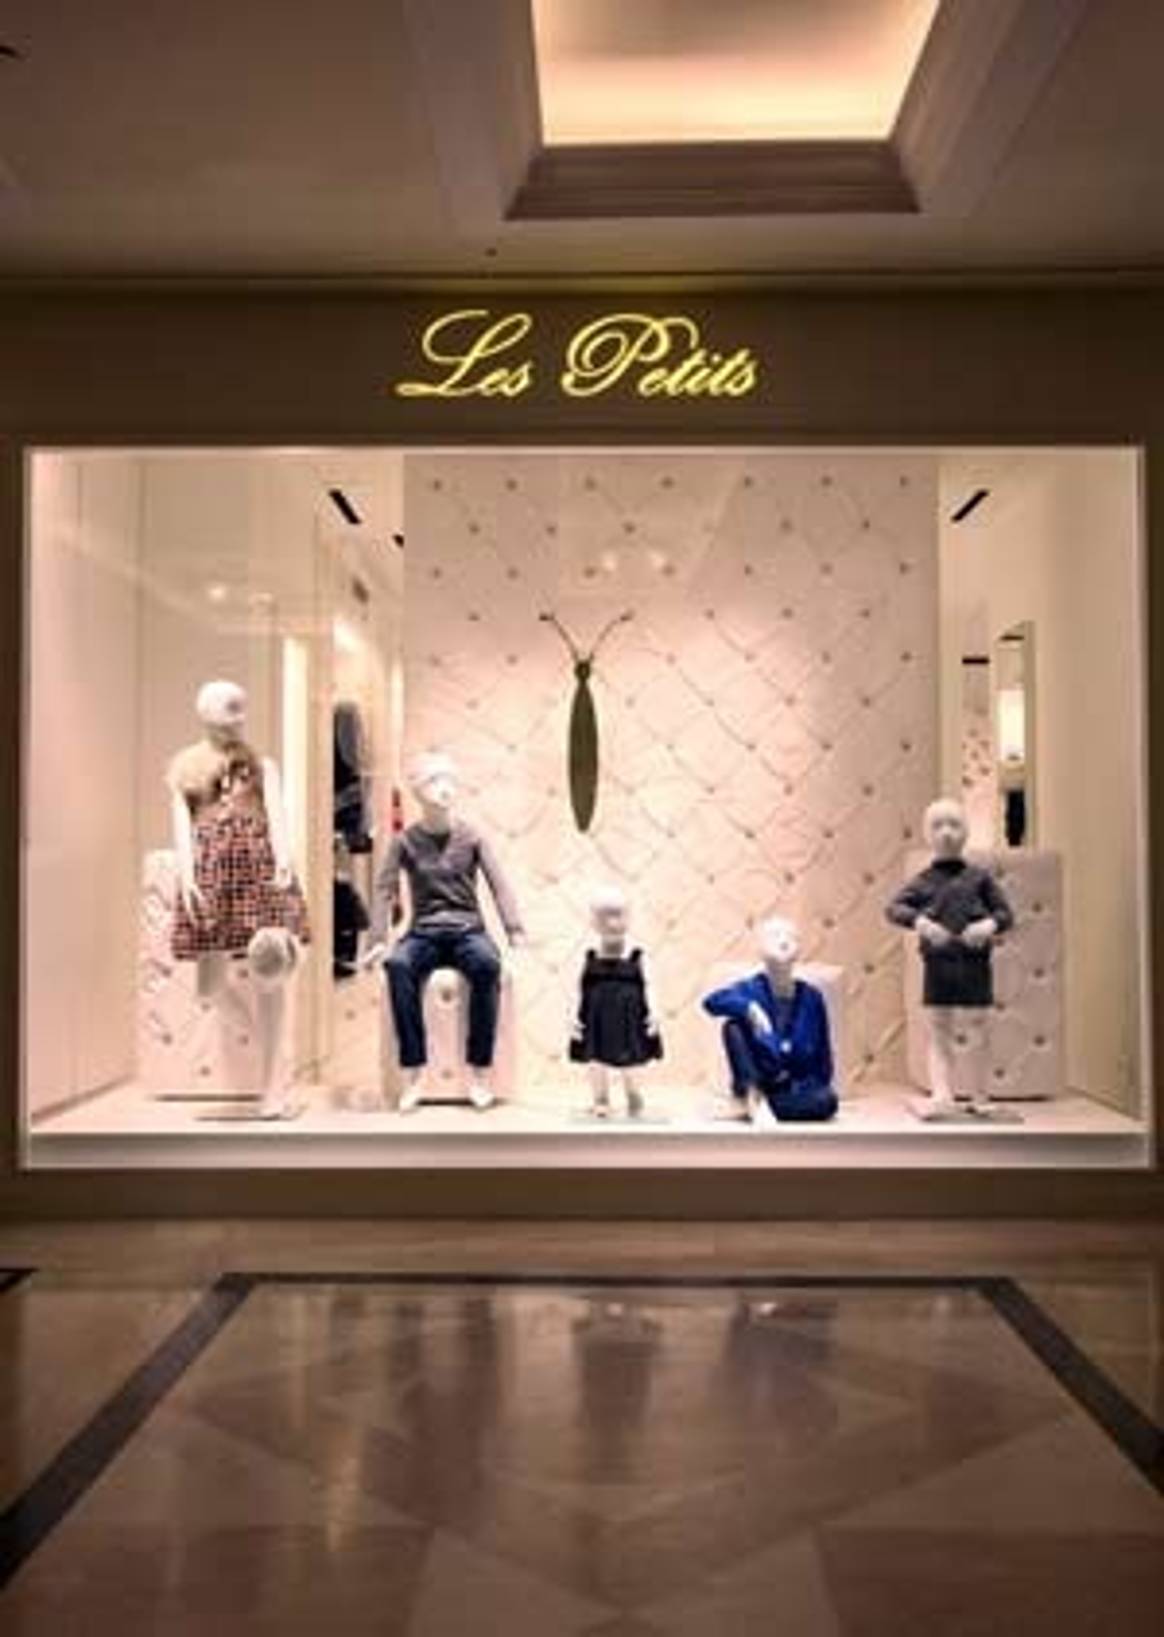 Les Petits: Redefining luxury kids’ market in India